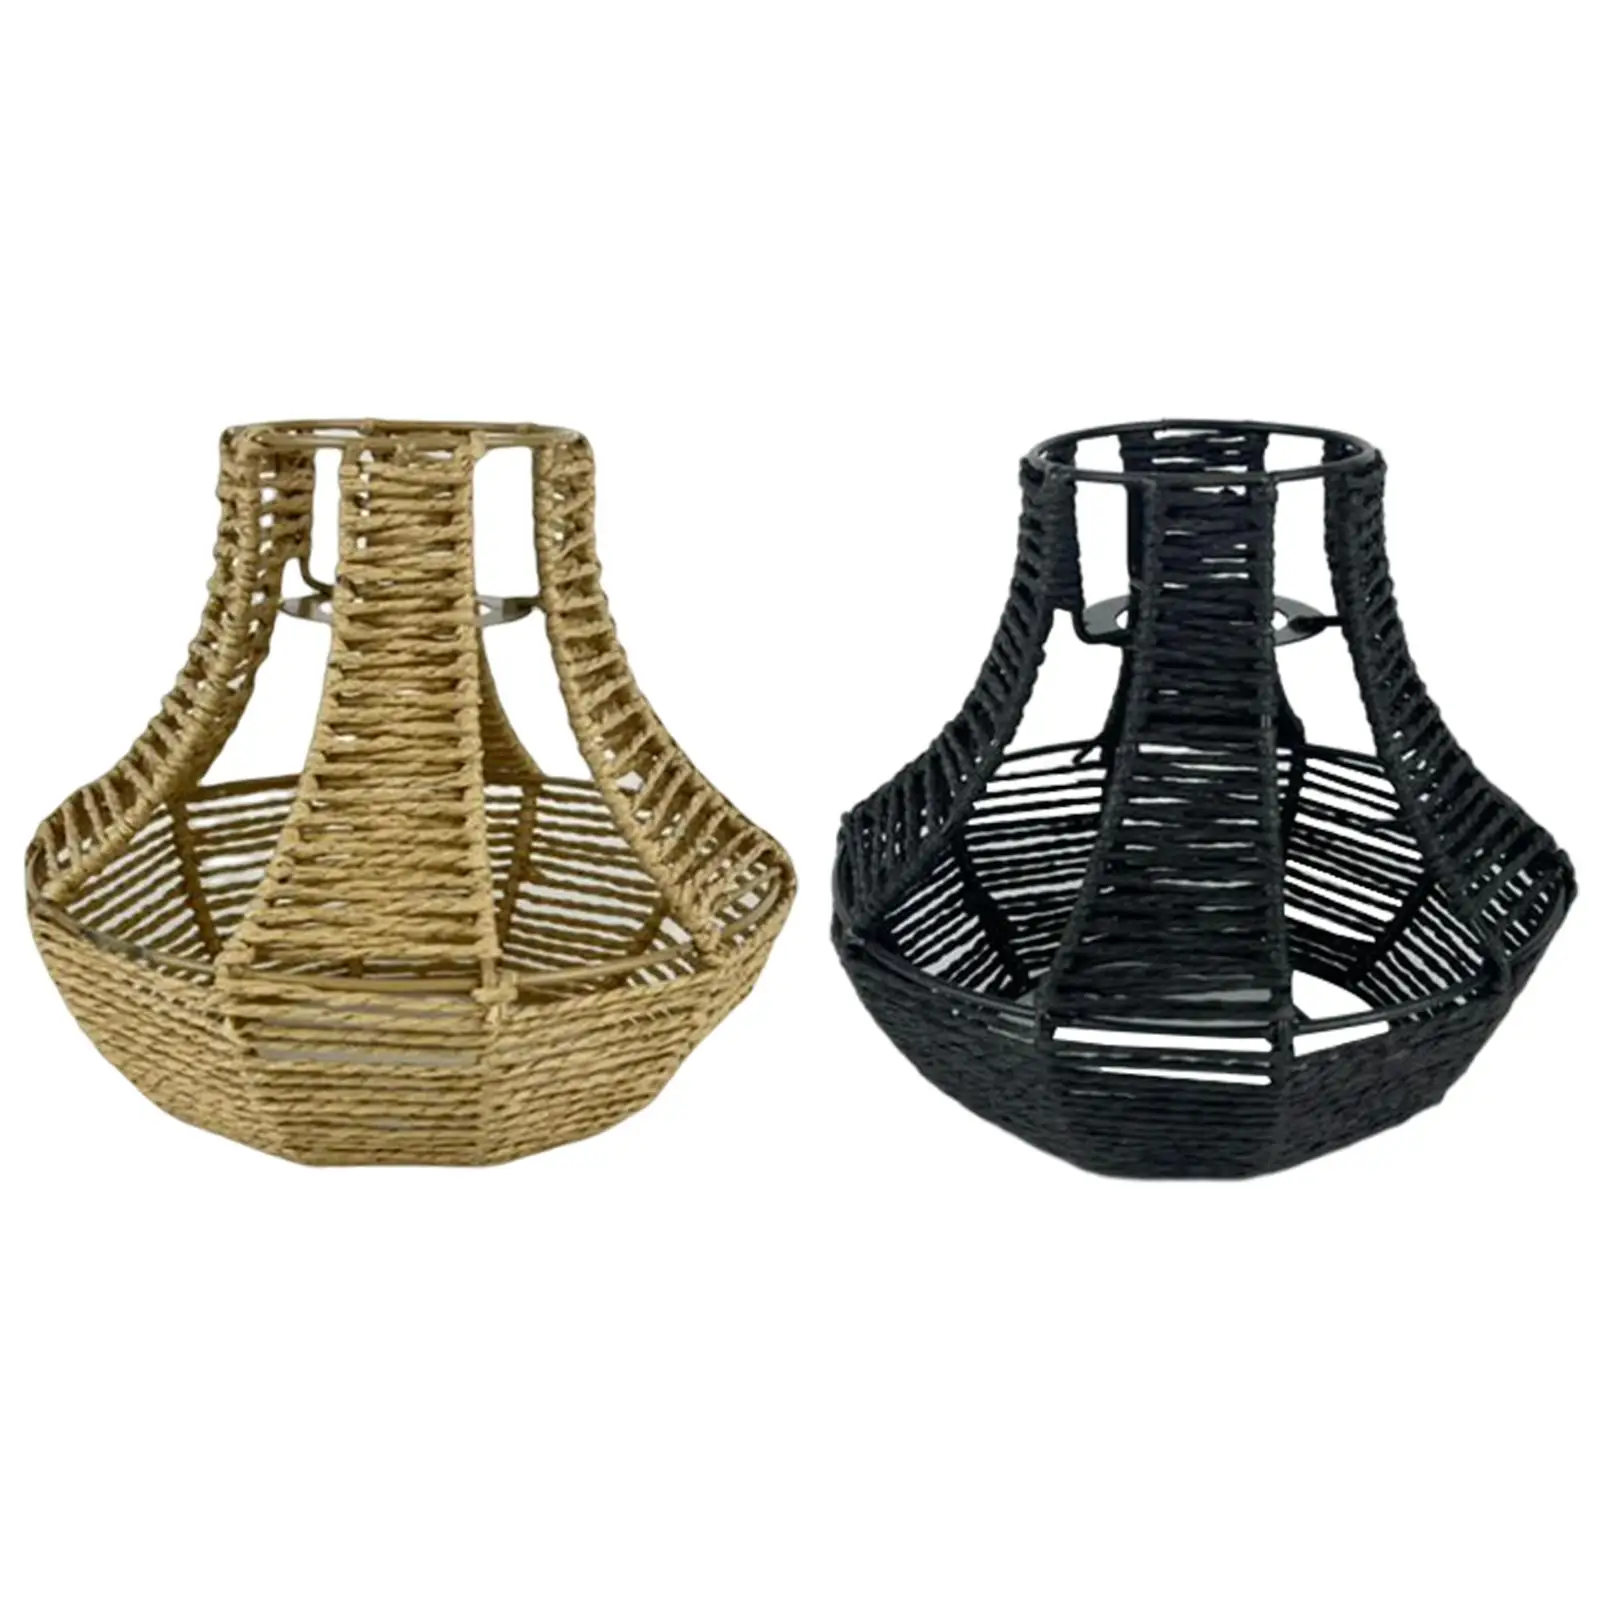 Woven Pendant Lamp Shade Paper Rope Lampshade for Hotel Restaurant Accessory